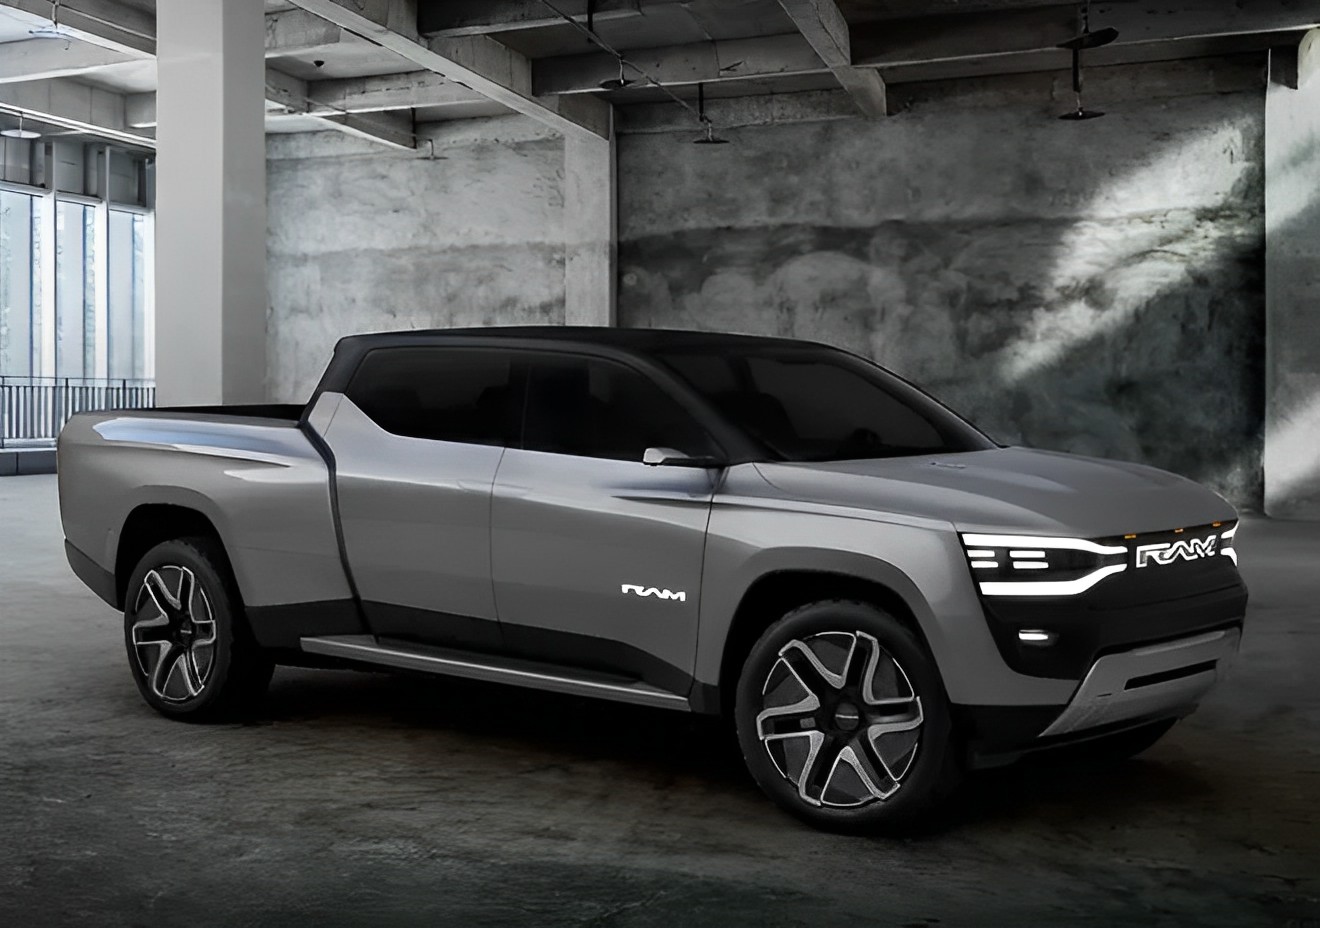 https://e-vehicleinfo.com/global/ram-1500-electric-pickup-truck-price-features-specifications/